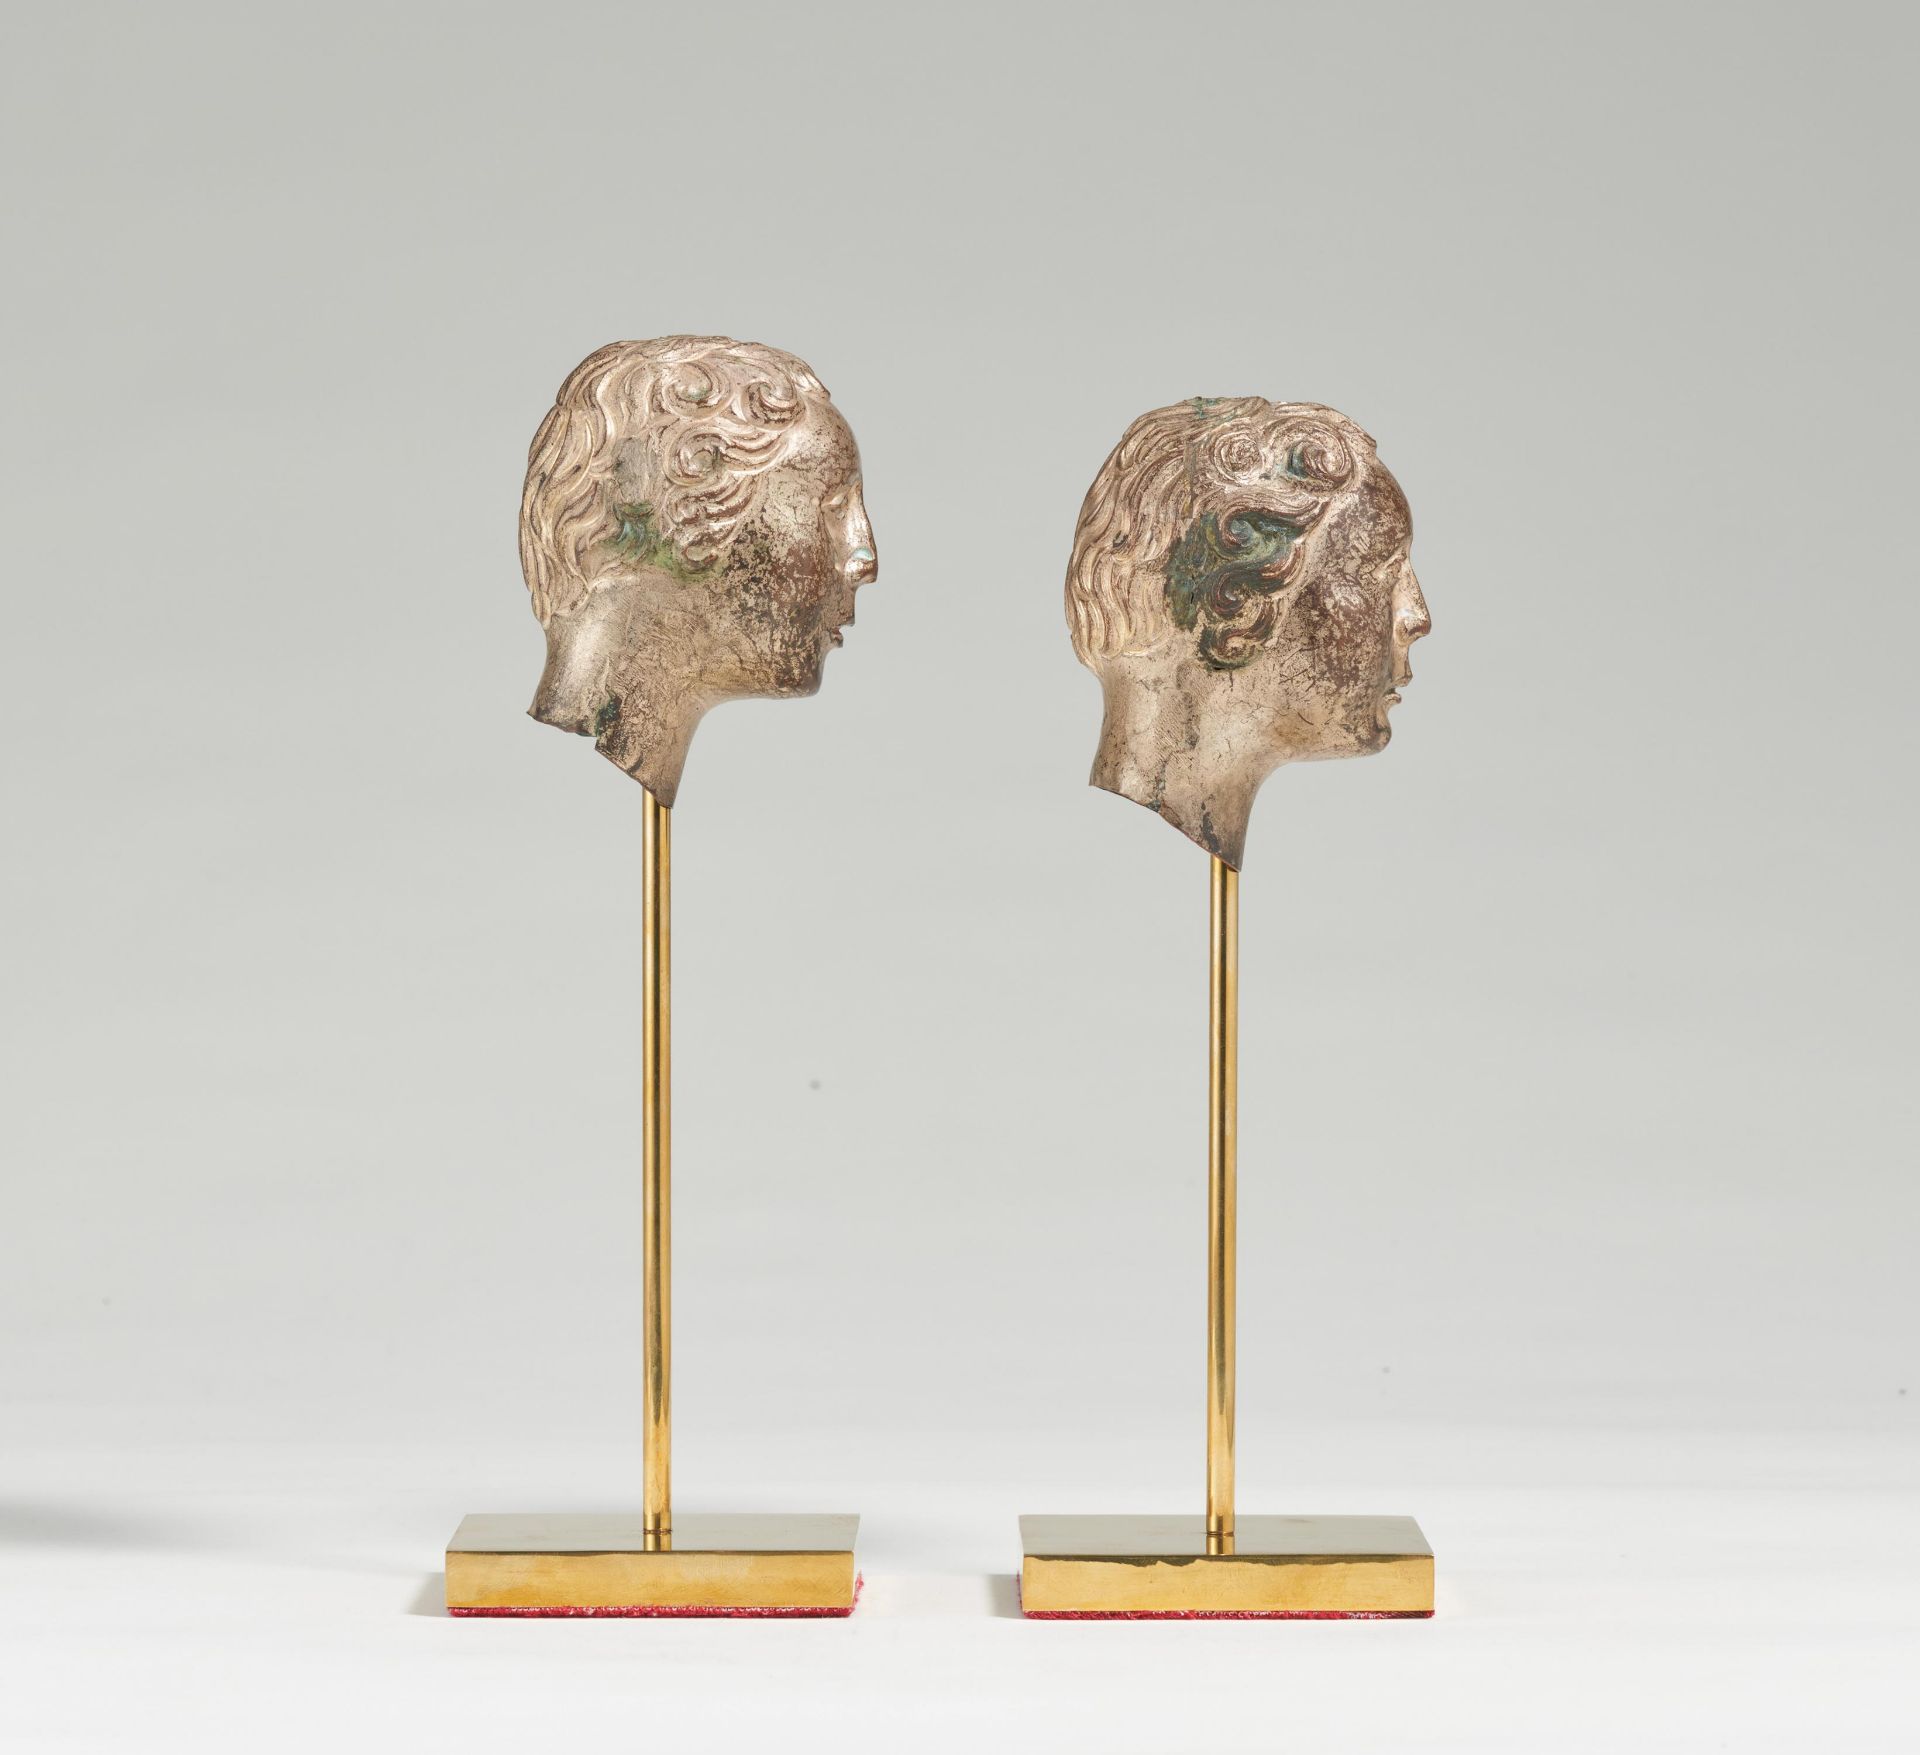 TWO HEADS MADE OF METAL - Image 4 of 5